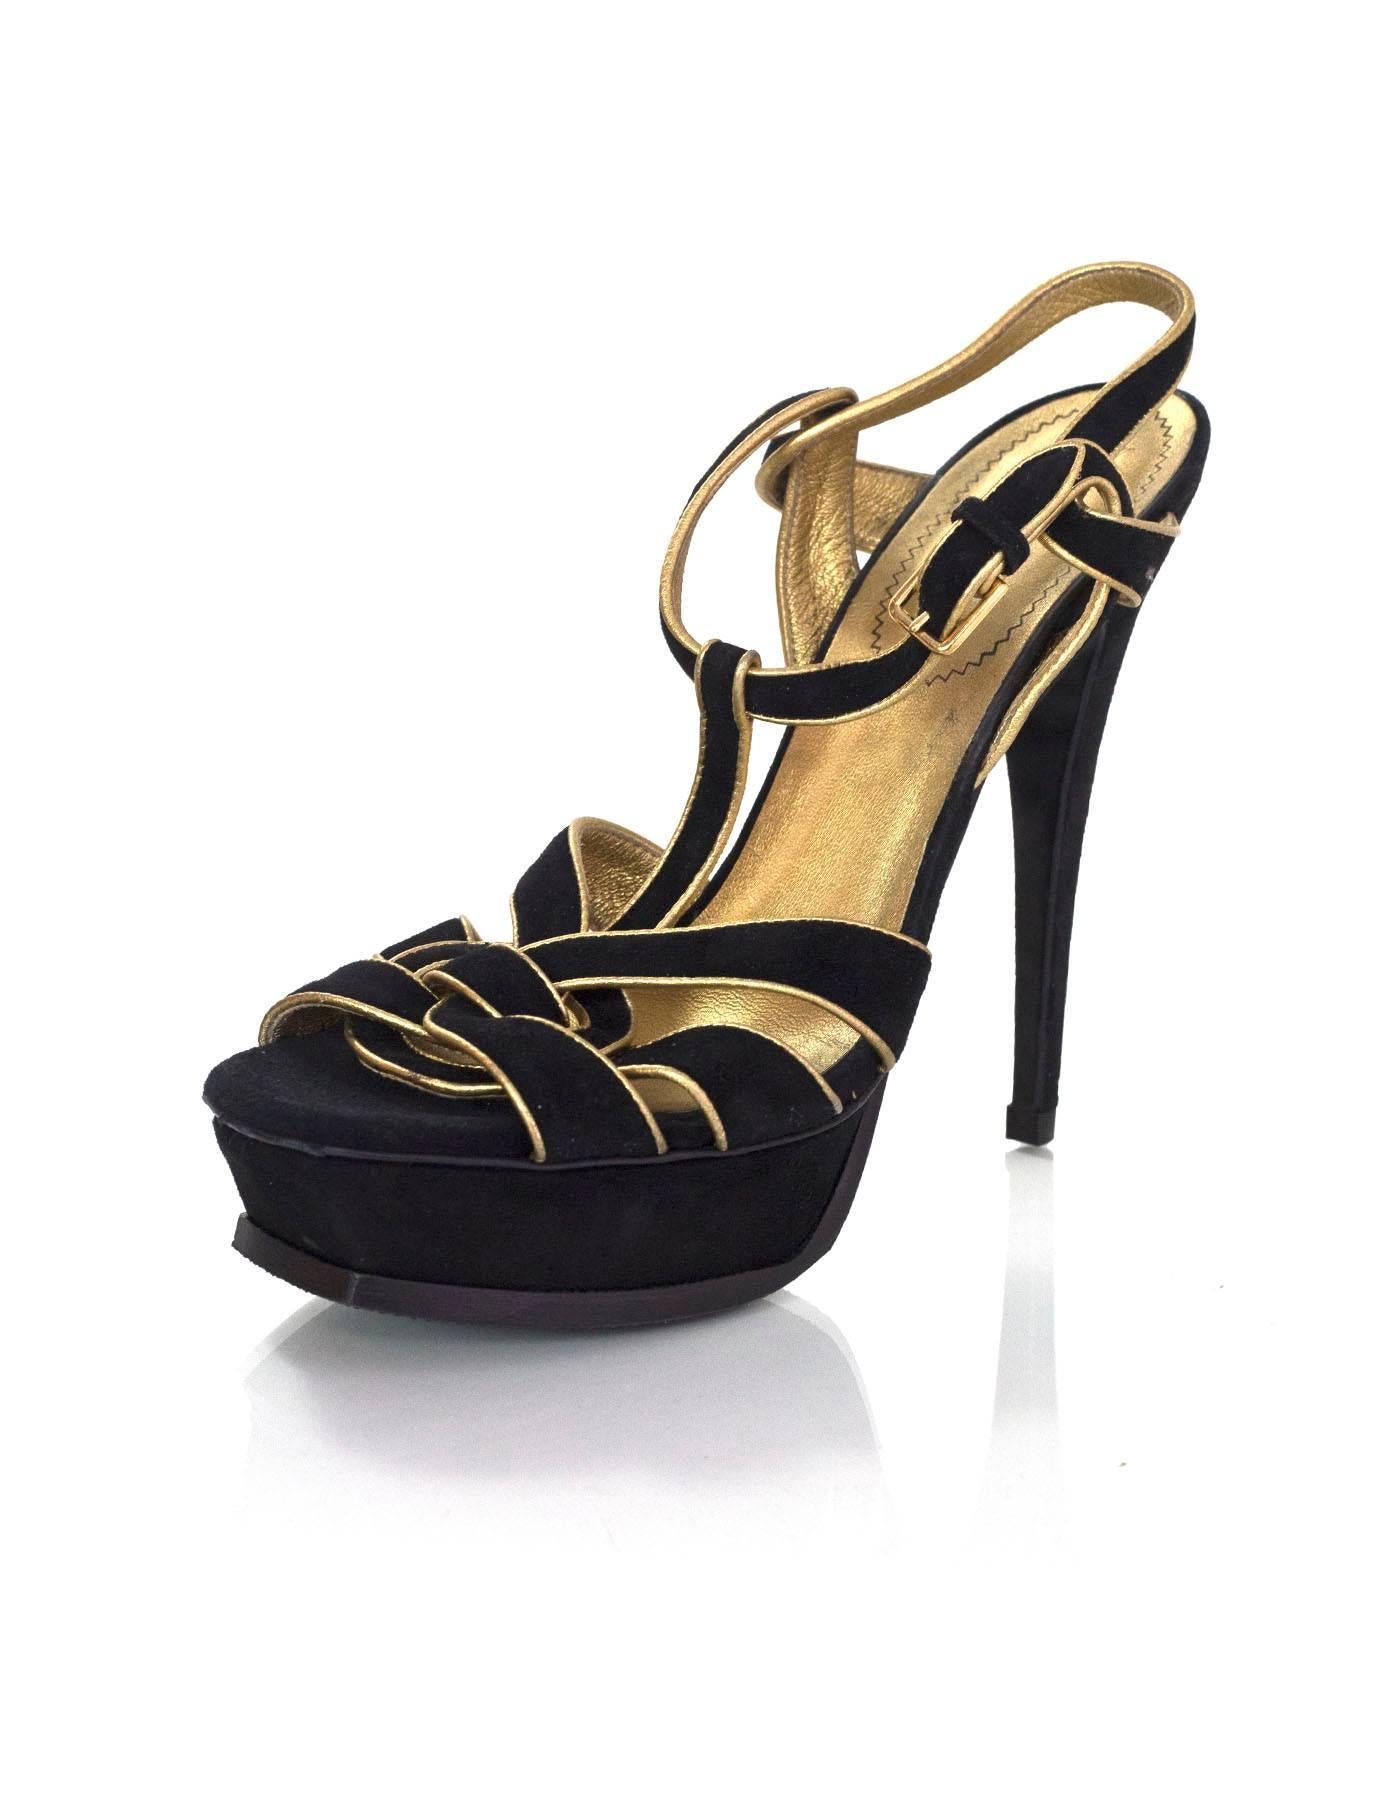 YSL Black/Gold Suede Tribute Sandals Sz 38.5

Made In: Italy
Color: Black, gold
Materials: Suede, leather
Closure/Opening: Buckle closure at ankle
Sole Stamp: Yves Saint Laurent Made in Italy 38.5
Overall Condition: Very good pre-owned condition